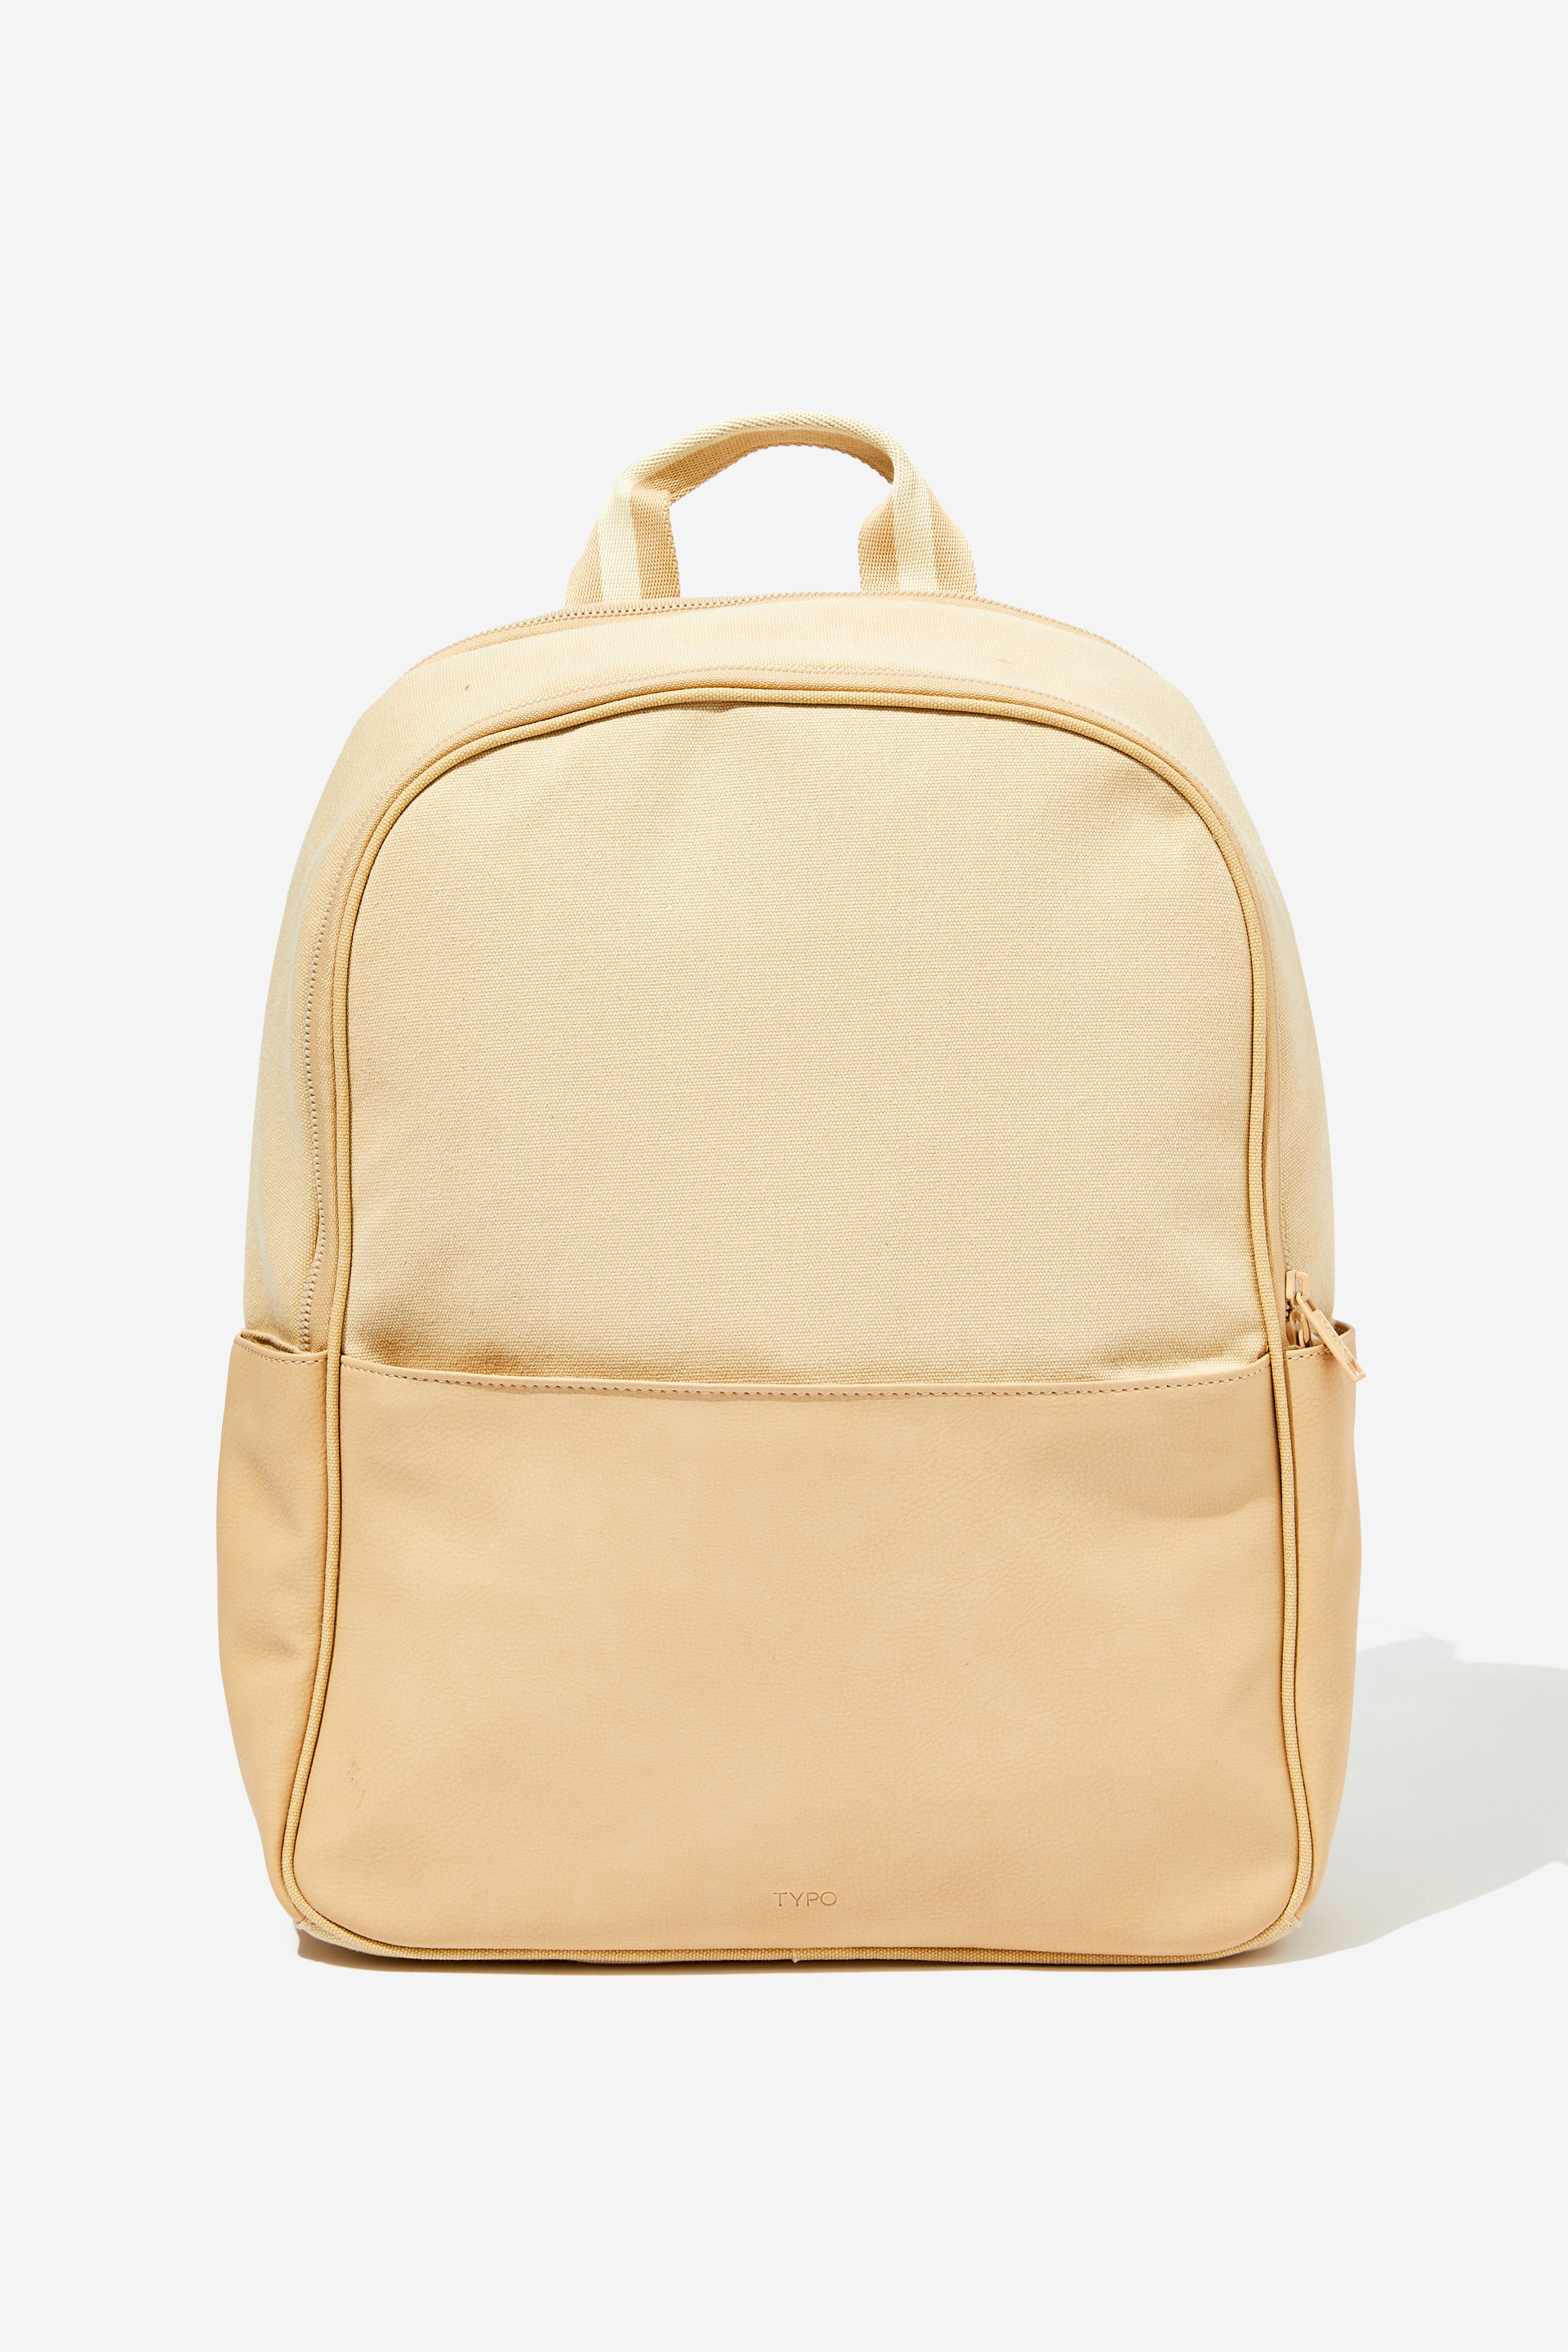 Typo - Essential Commuter Backpack - Latte